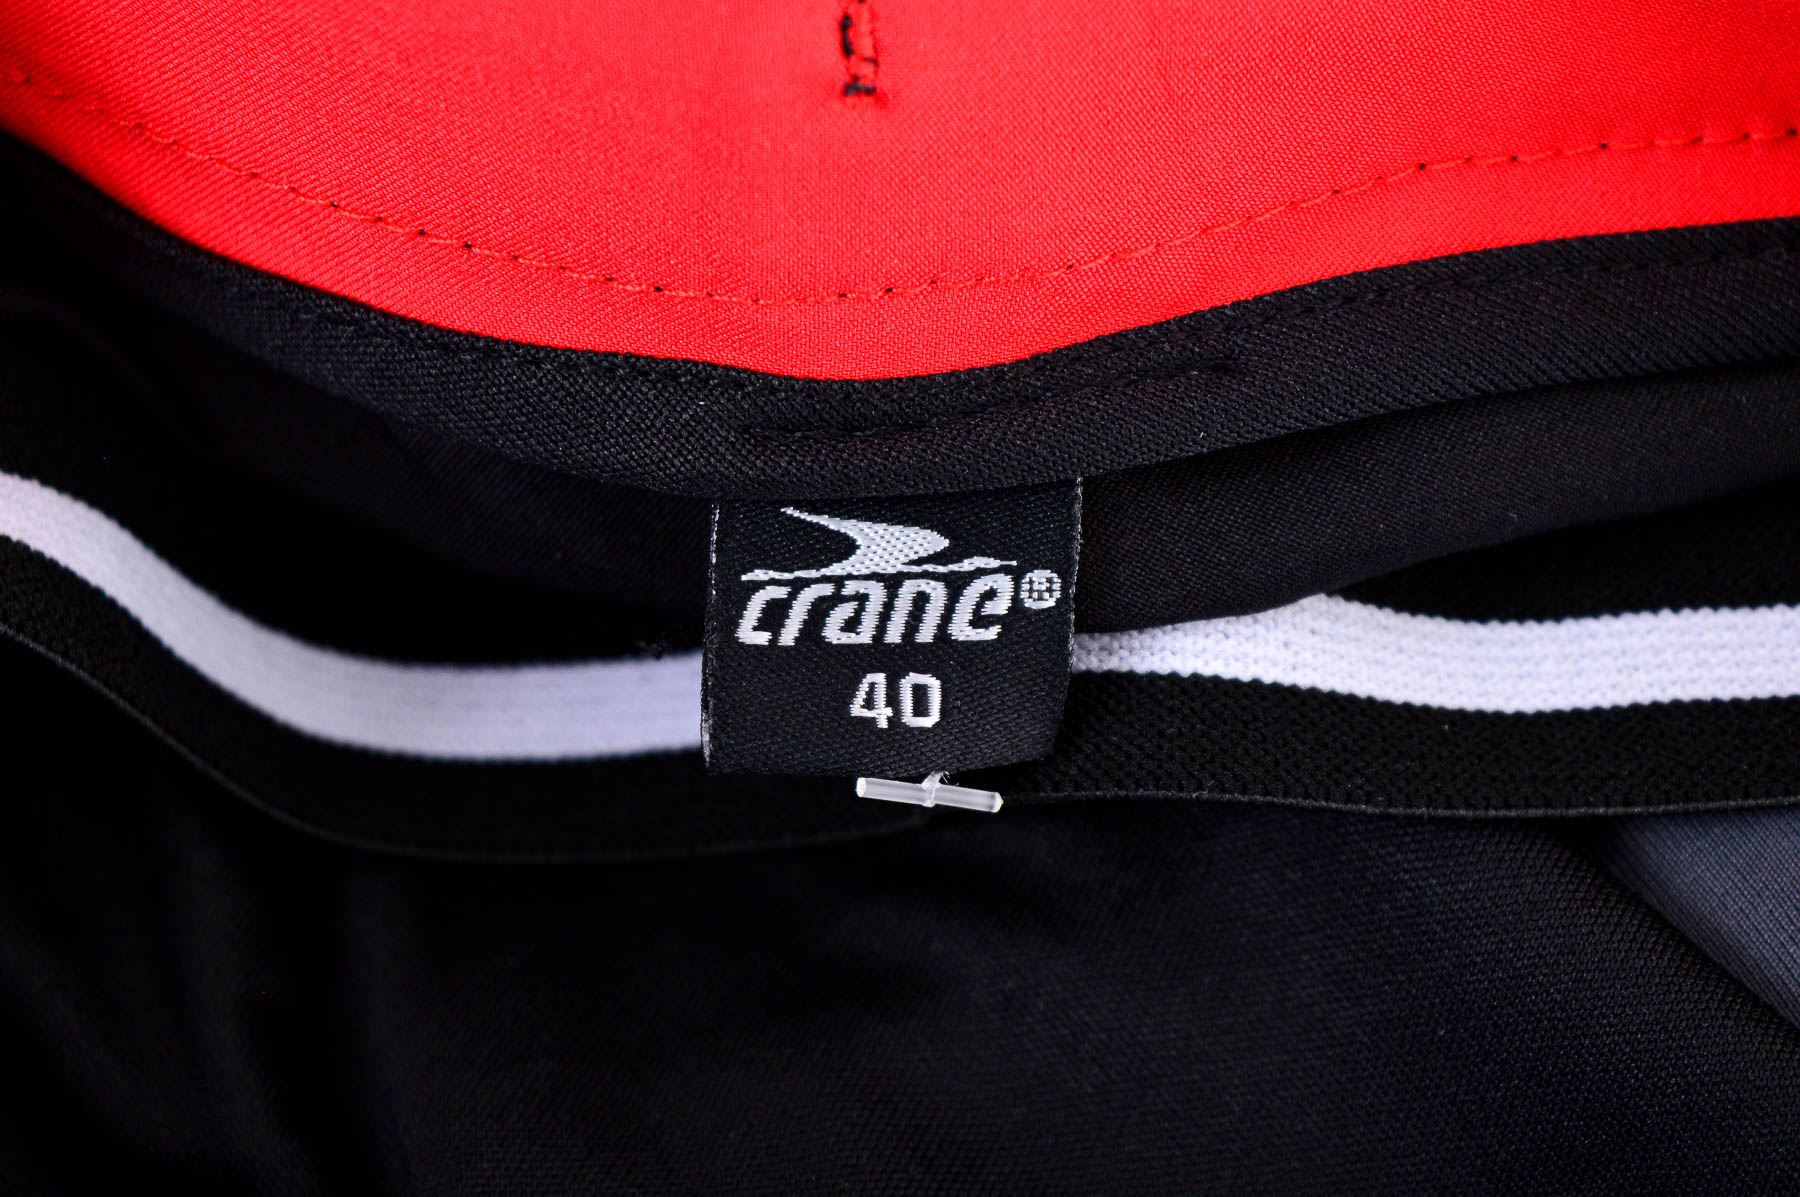 Female shorts for cycling - Crane - 2